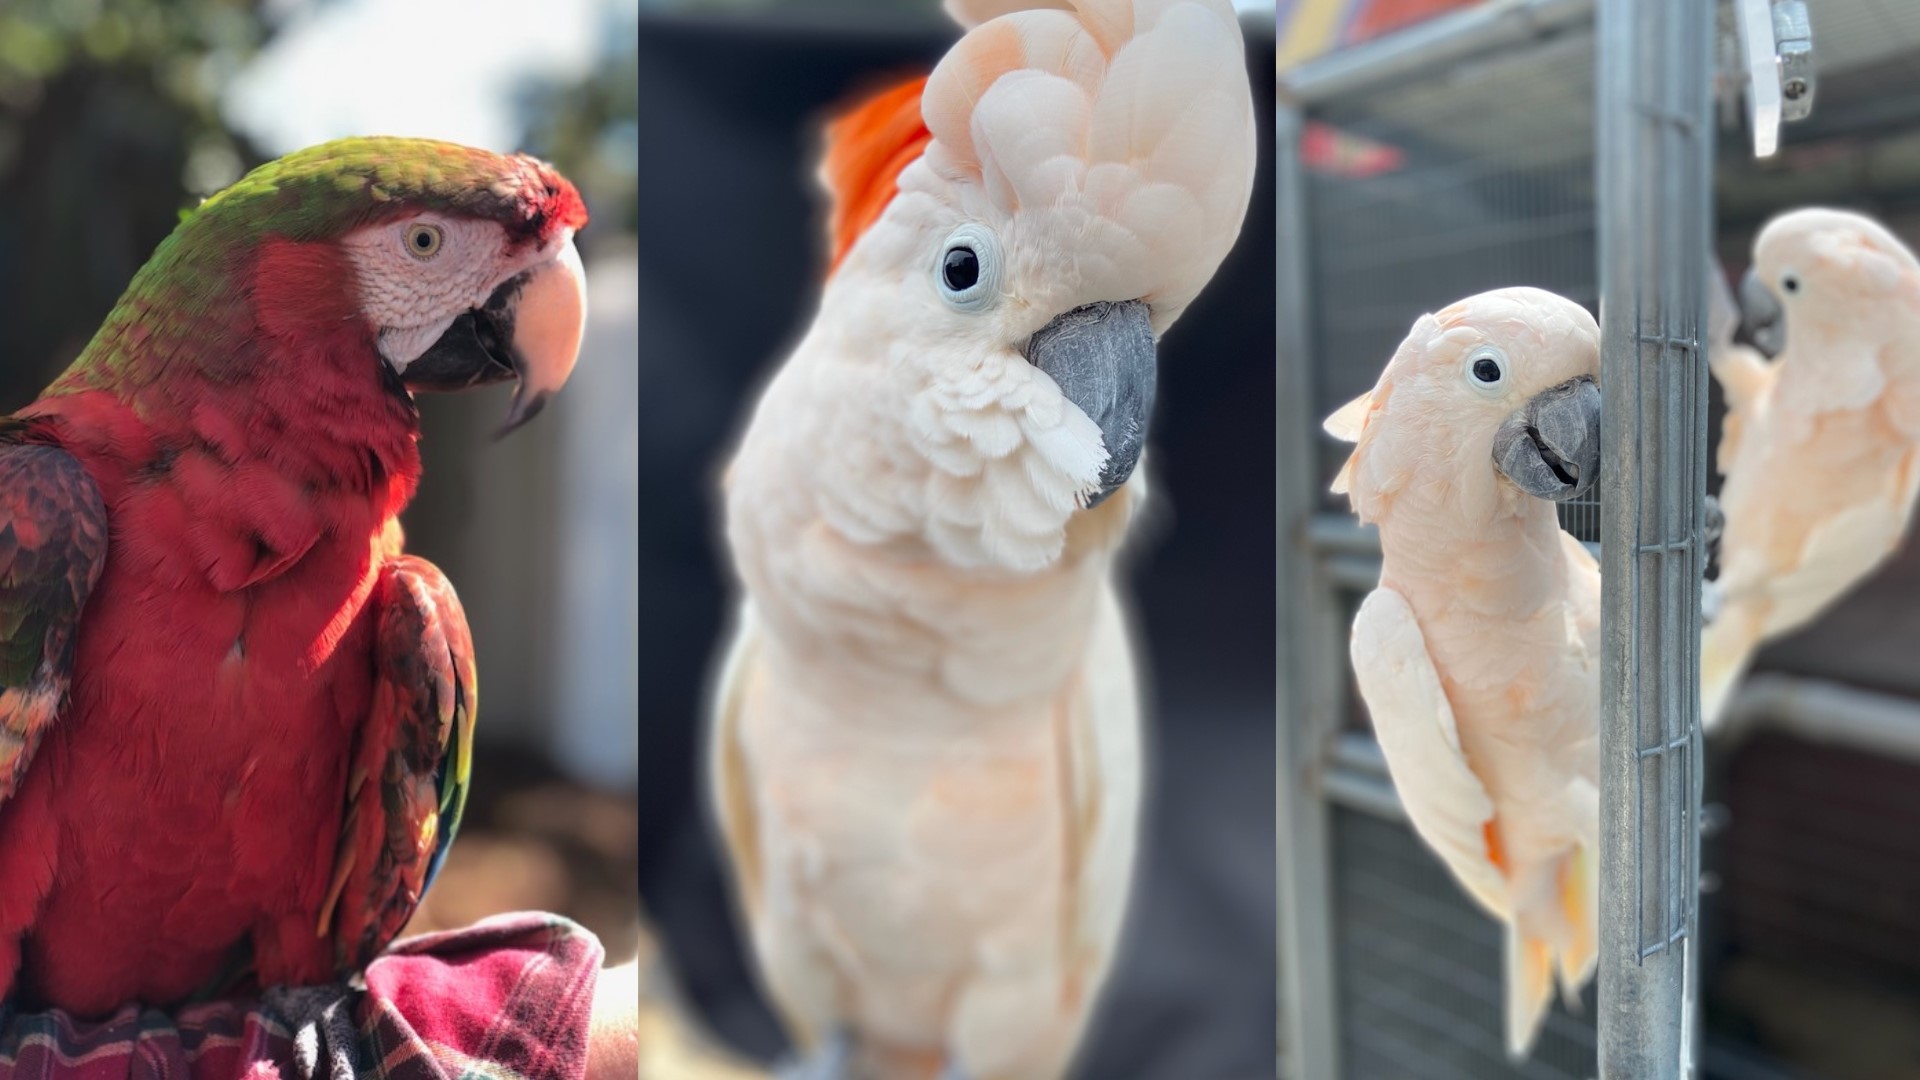 The owner said that many customers who have been coming for 30 years now are drawn to the restaurant because of the relationships they have molded with the parrots.